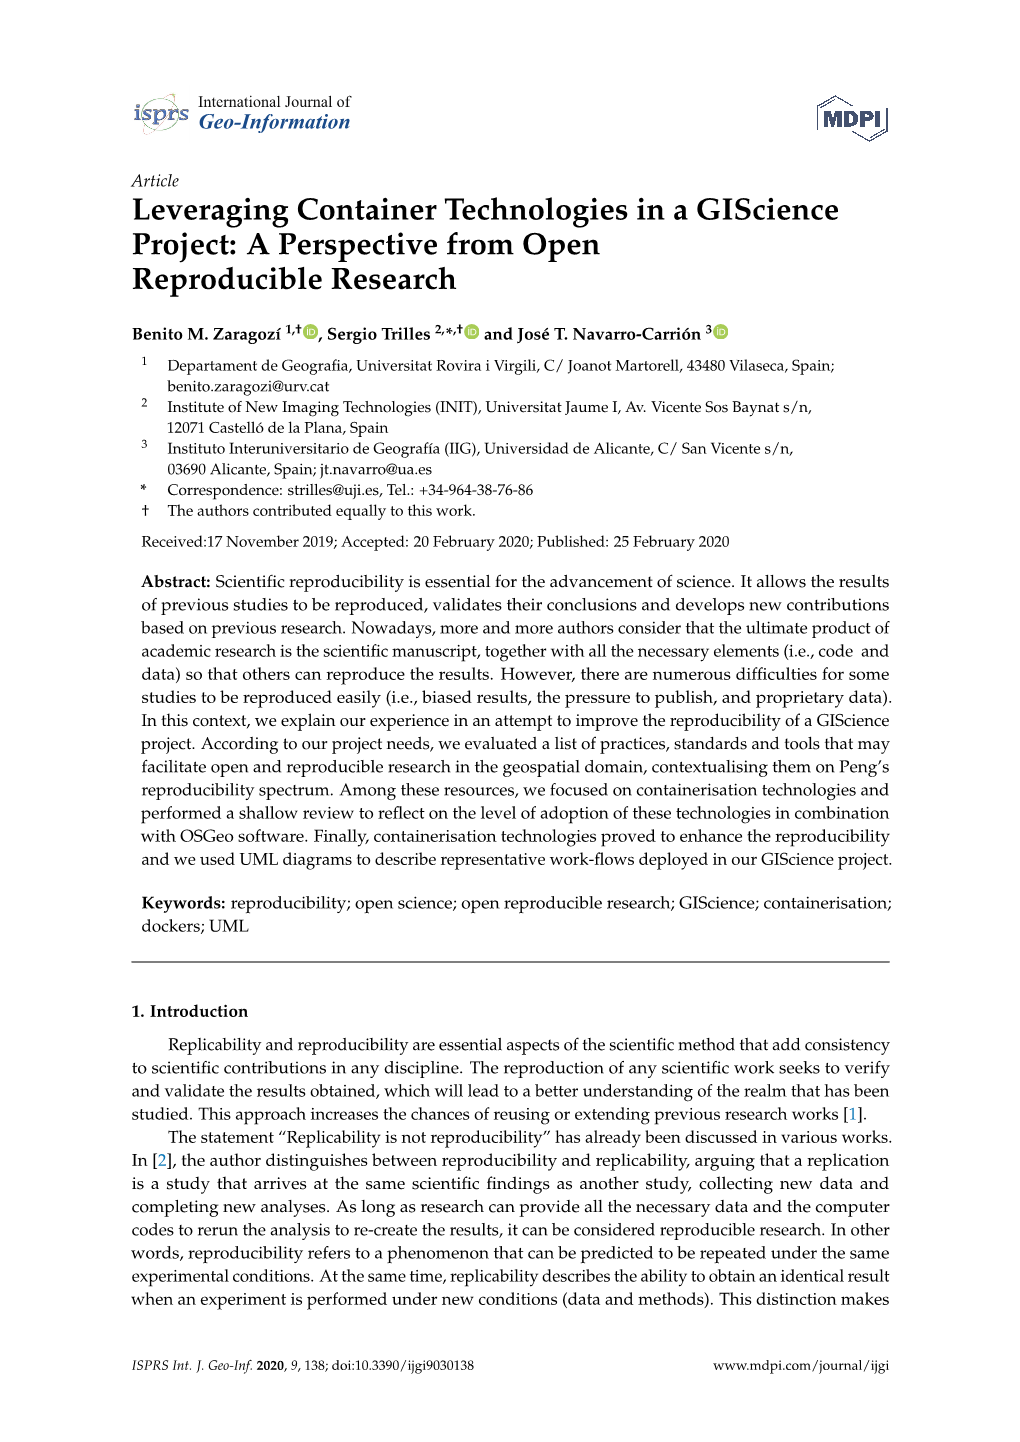 Leveraging Container Technologies in a Giscience Project: a Perspective from Open Reproducible Research